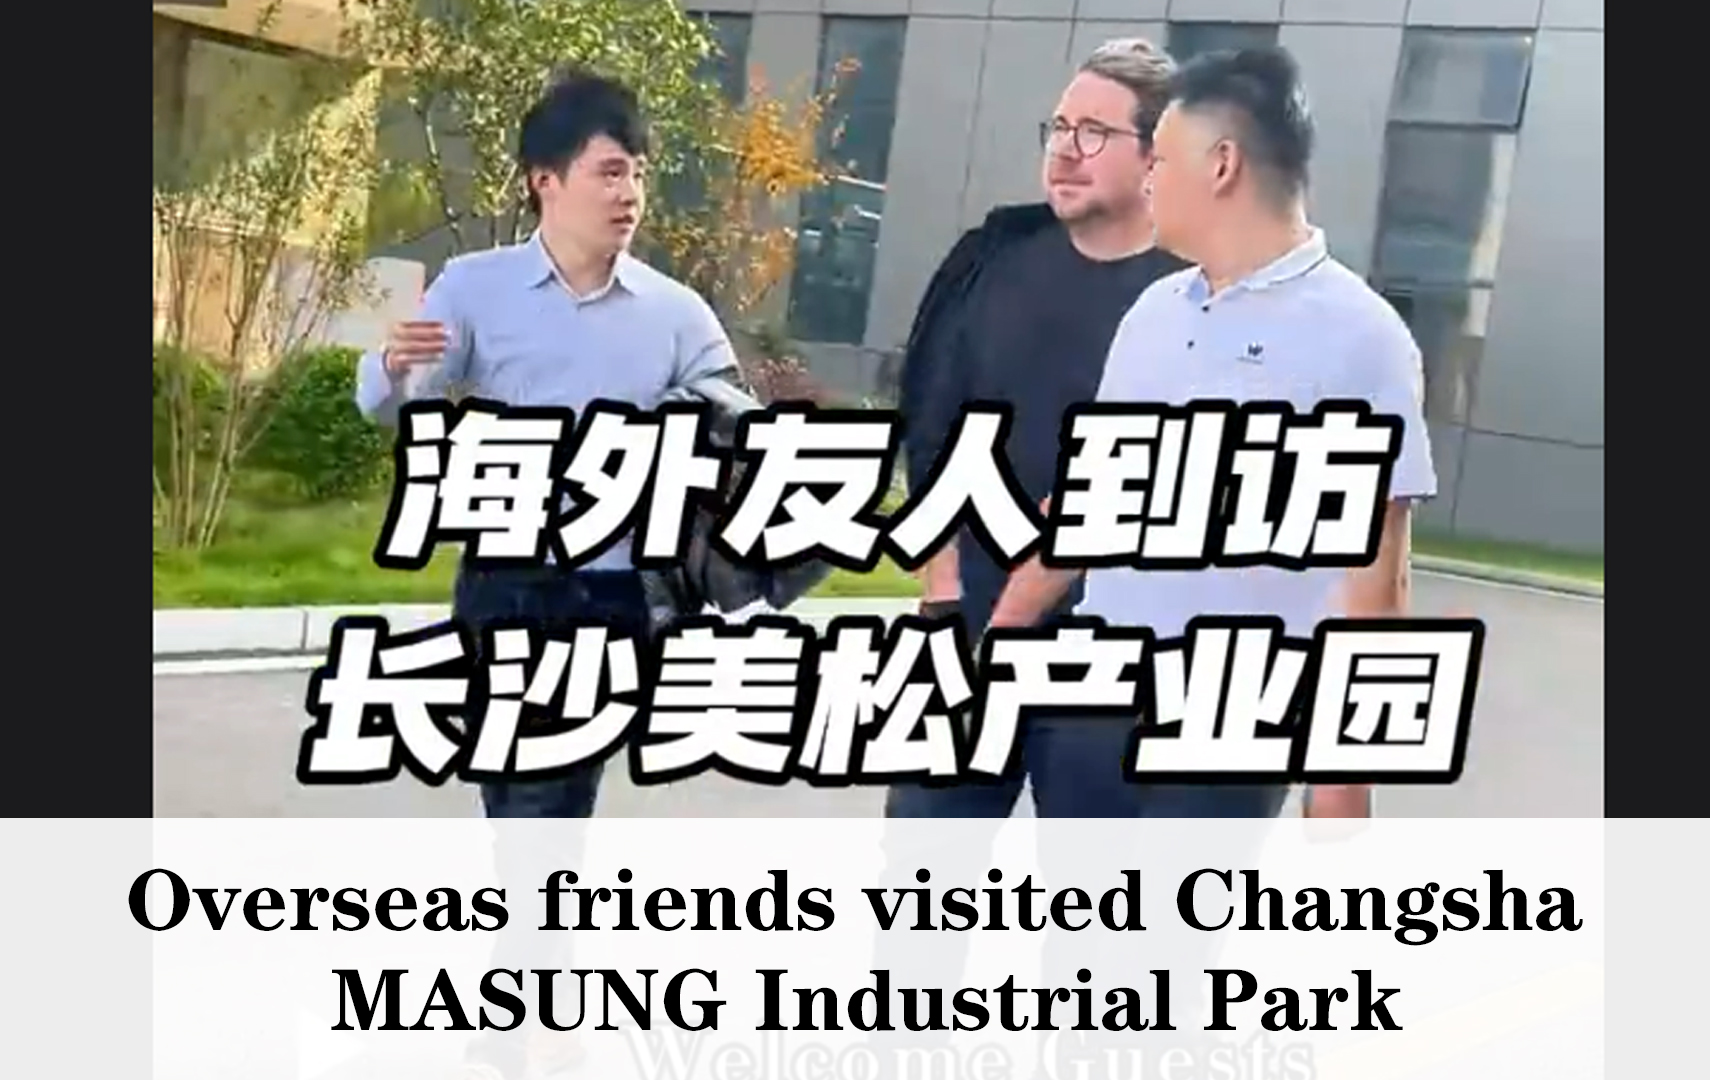 Foreign customers visit MASUNG Industrial Park to demonstrate the potential for in-depth cooperation